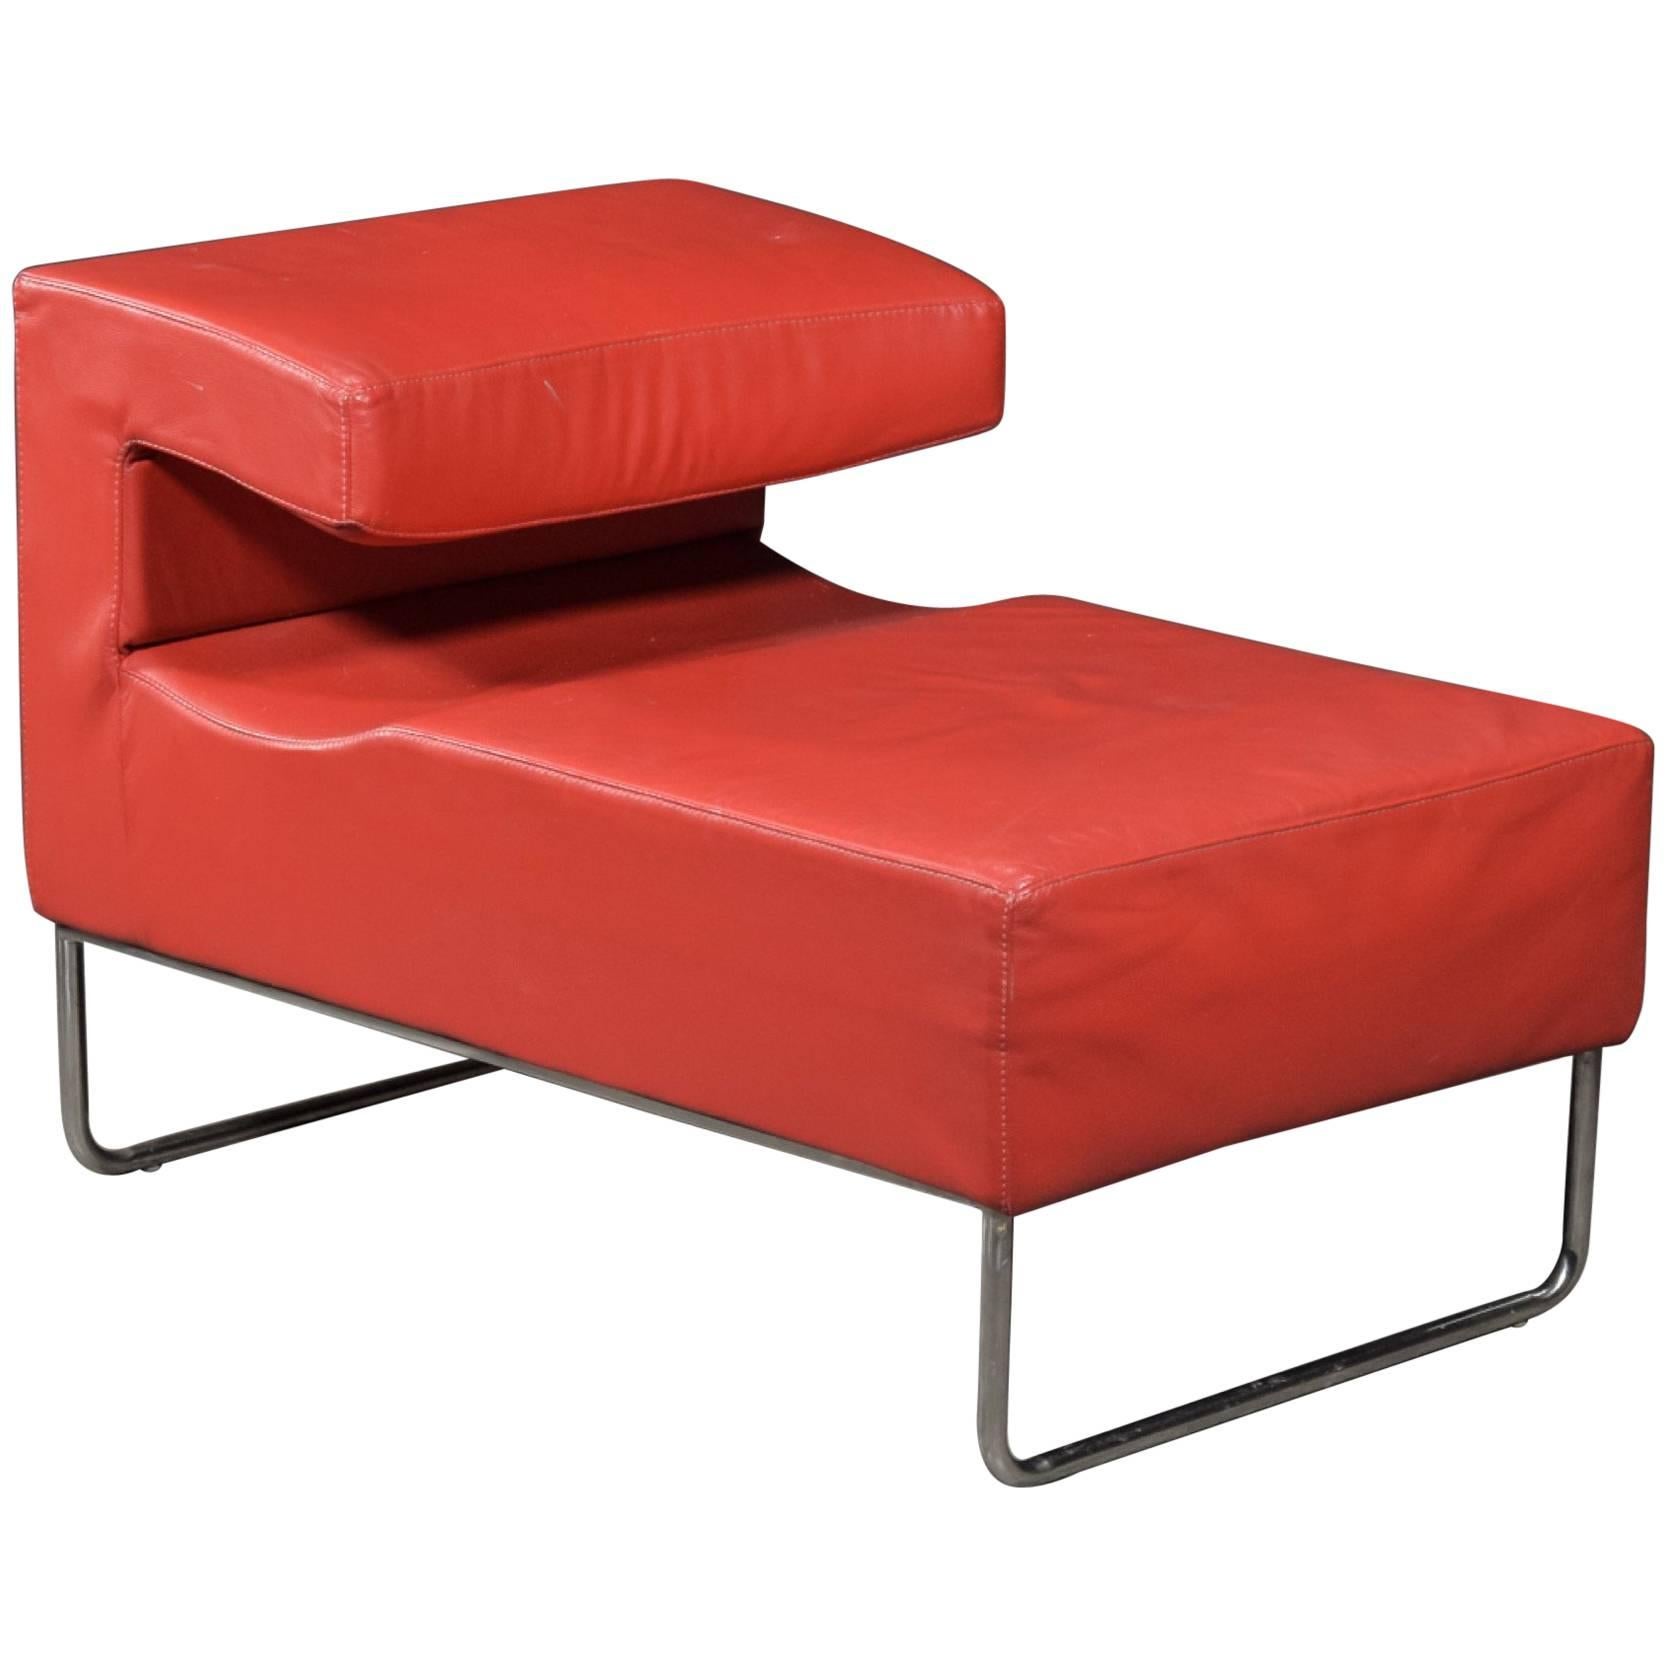 Red Chaise Longue Chair